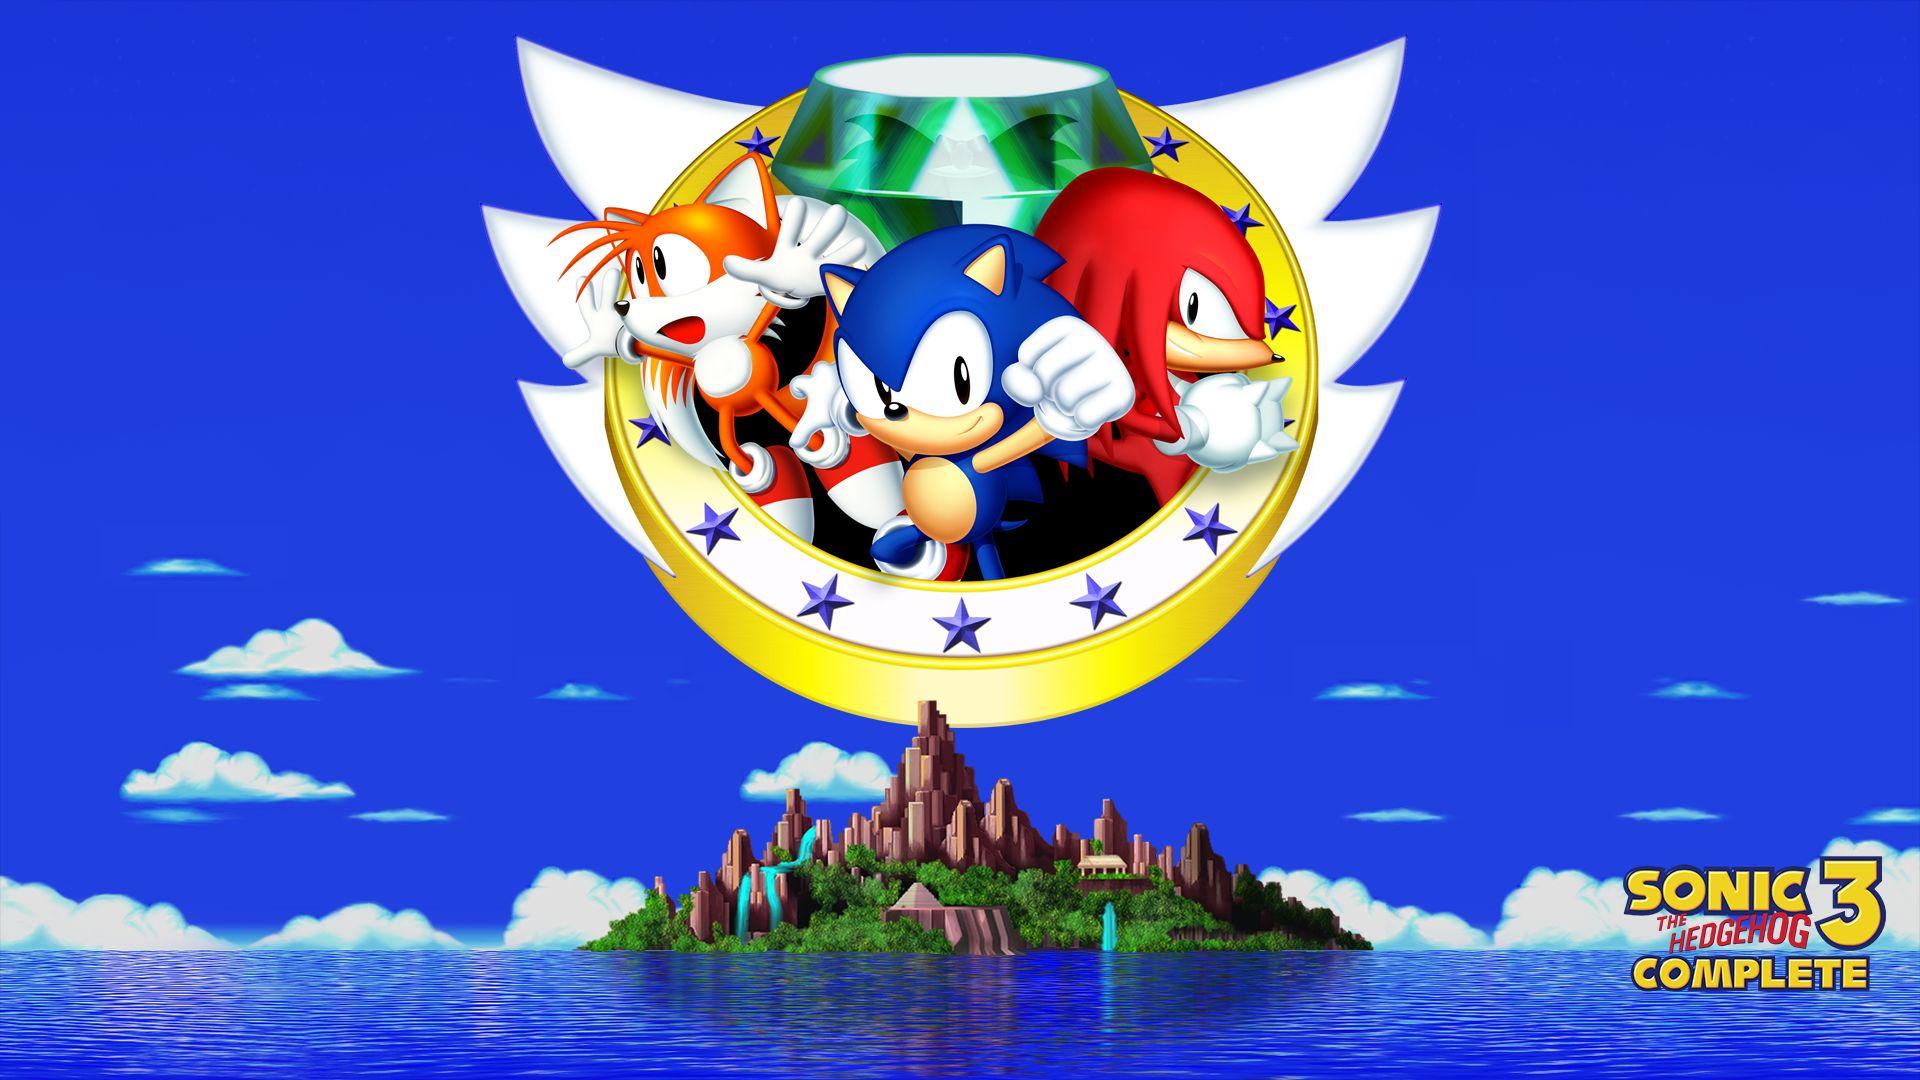 Sonic the Hedgehog 3 HD Wallpaper. Background Image